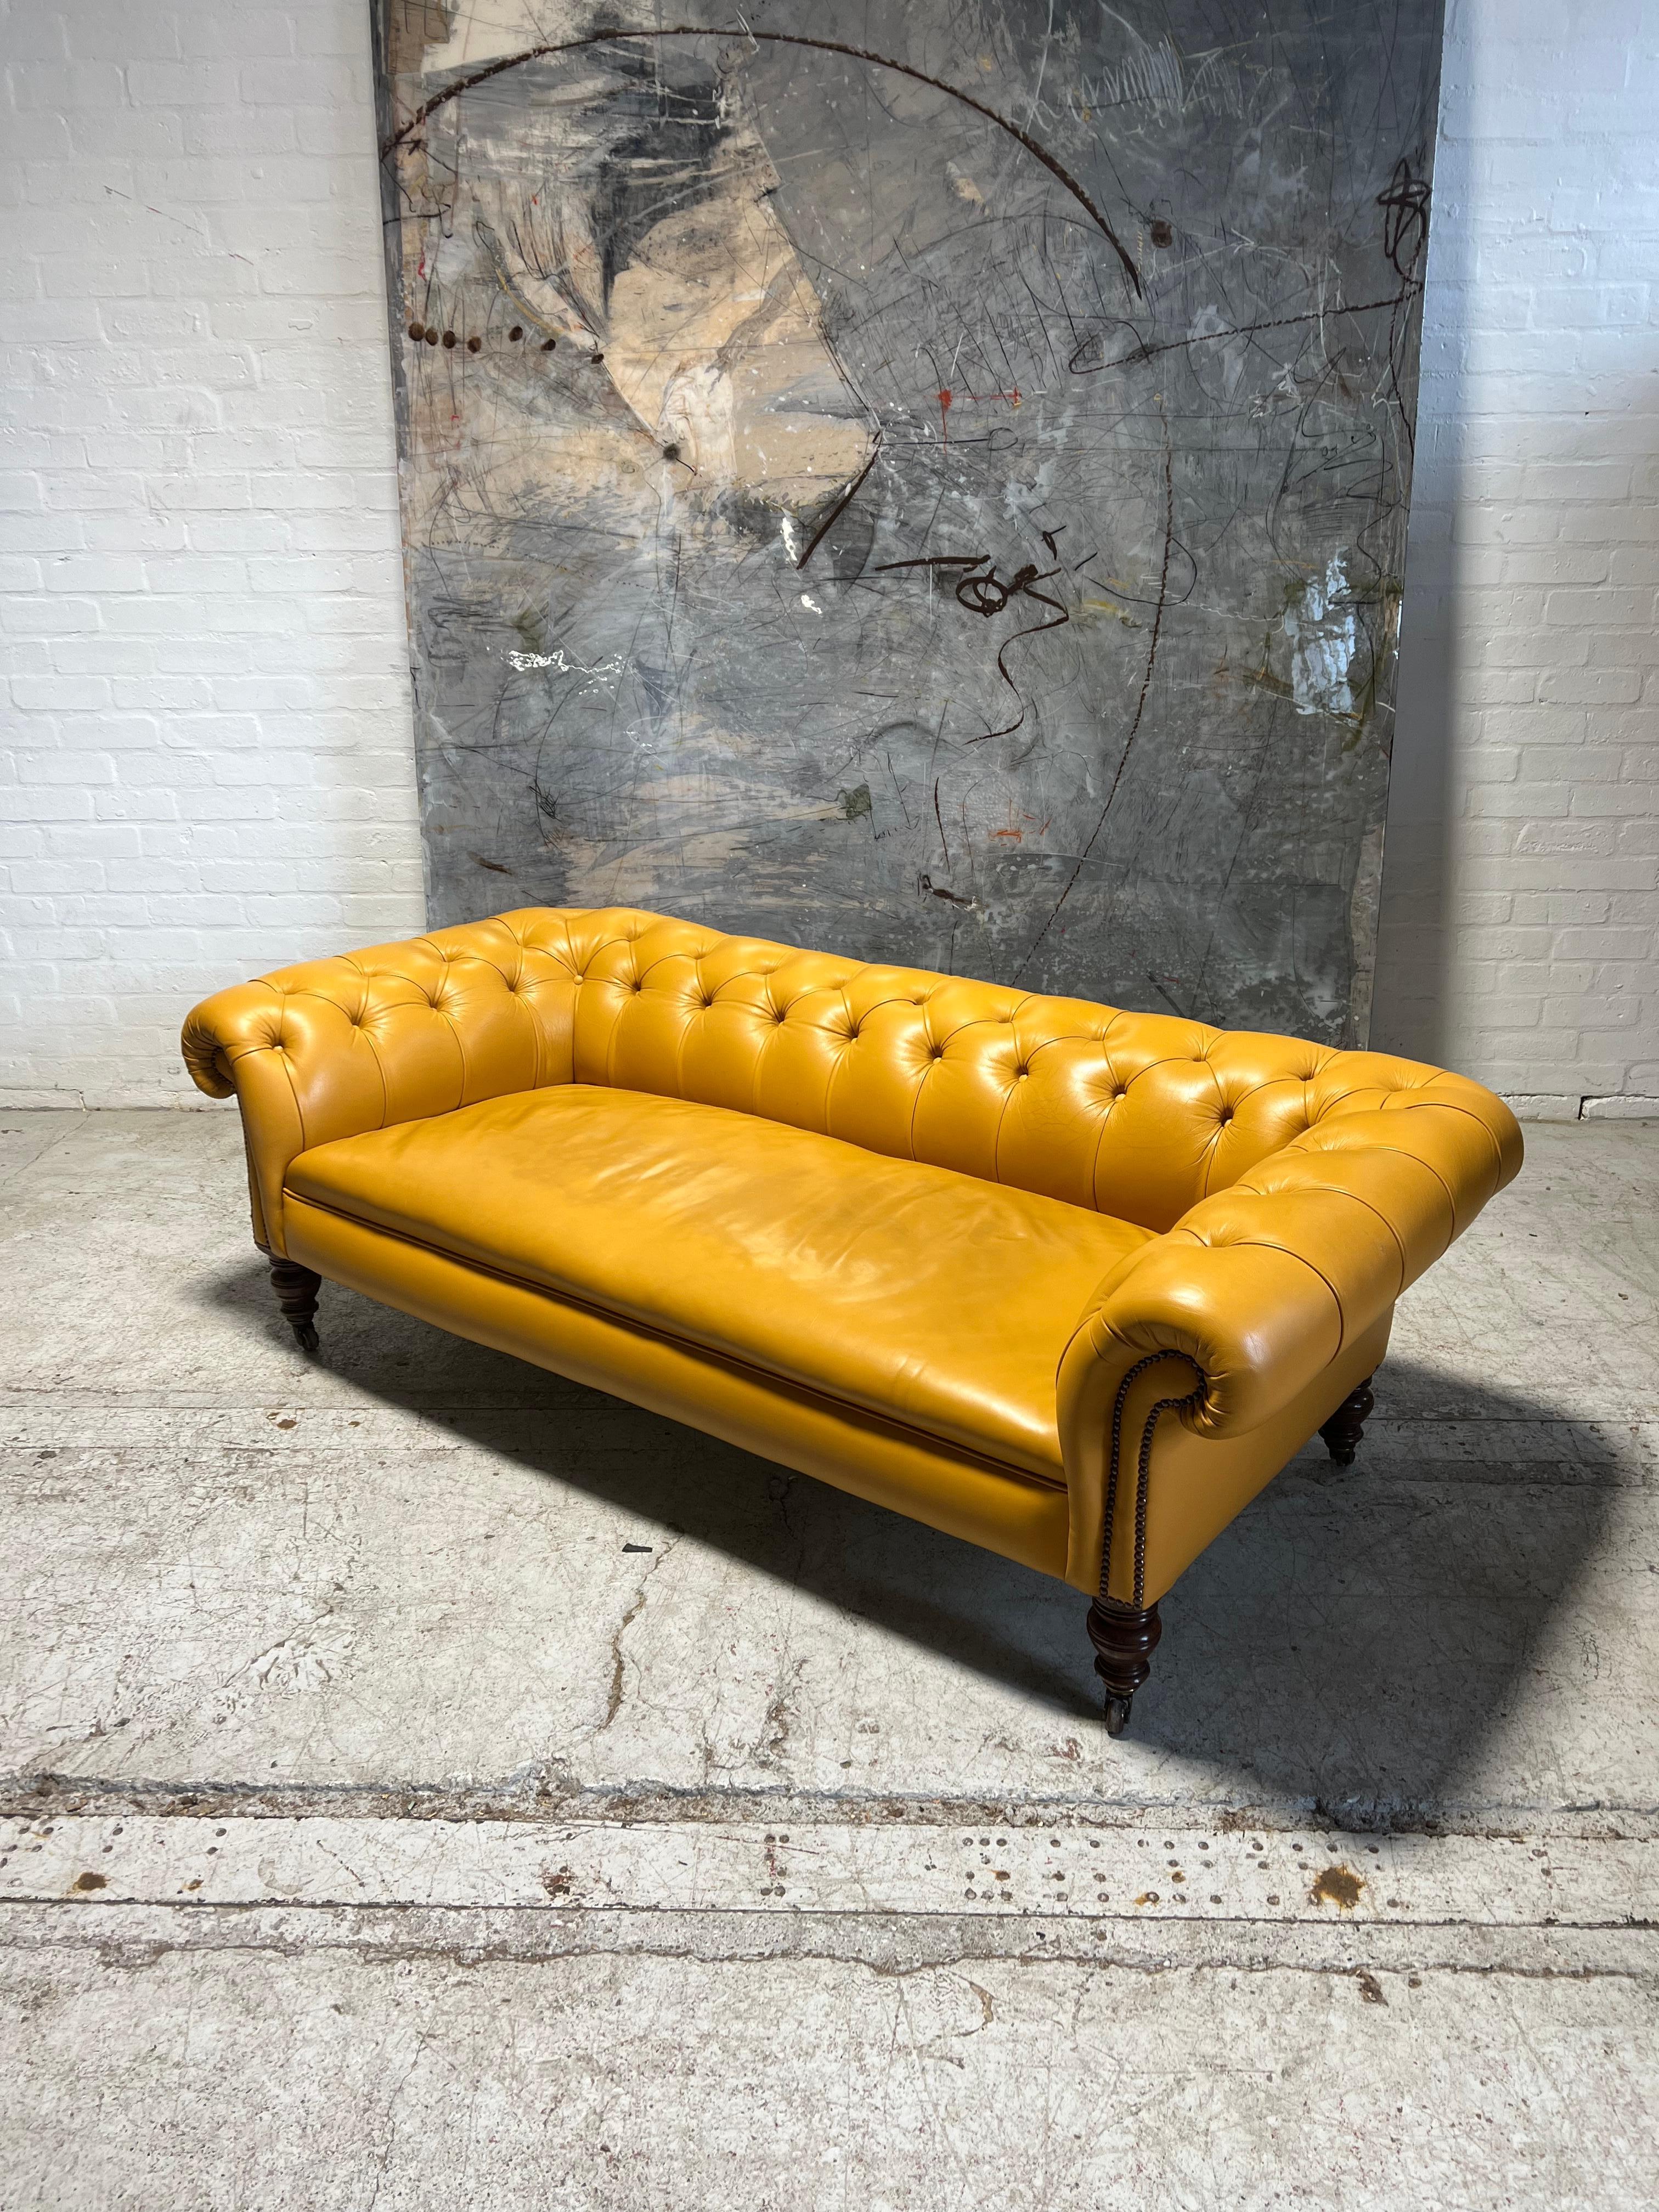 Antique 19thC Chesterfield Sofa in Stunning Sunflower Yellow Leather 3